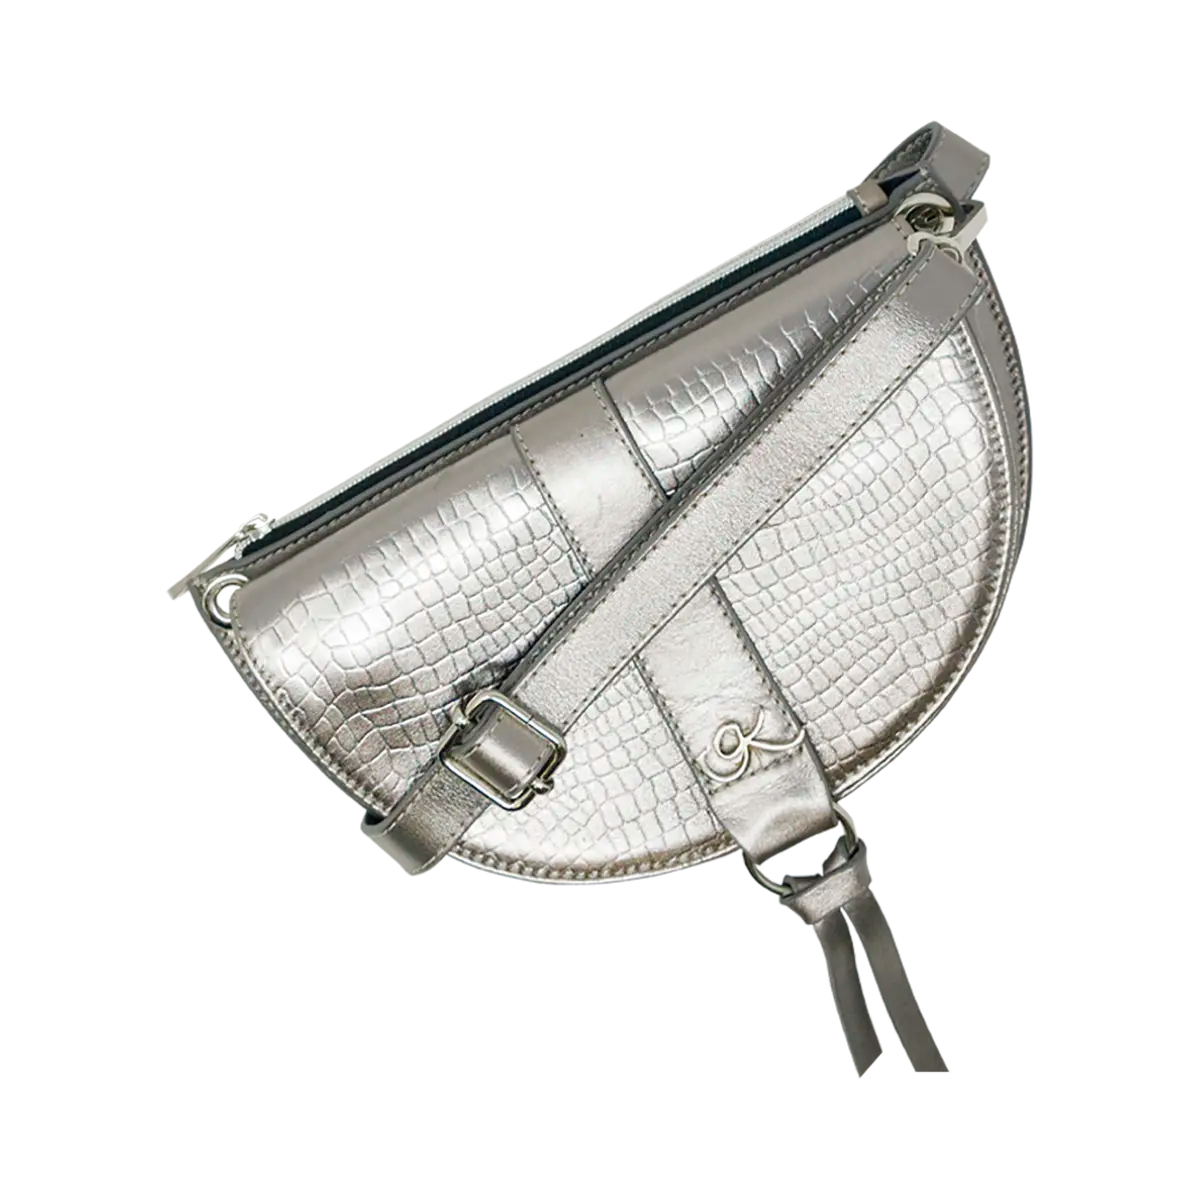 silver print leather crossbody bag and fanny pack. Accessory for women in San Diego, CA.